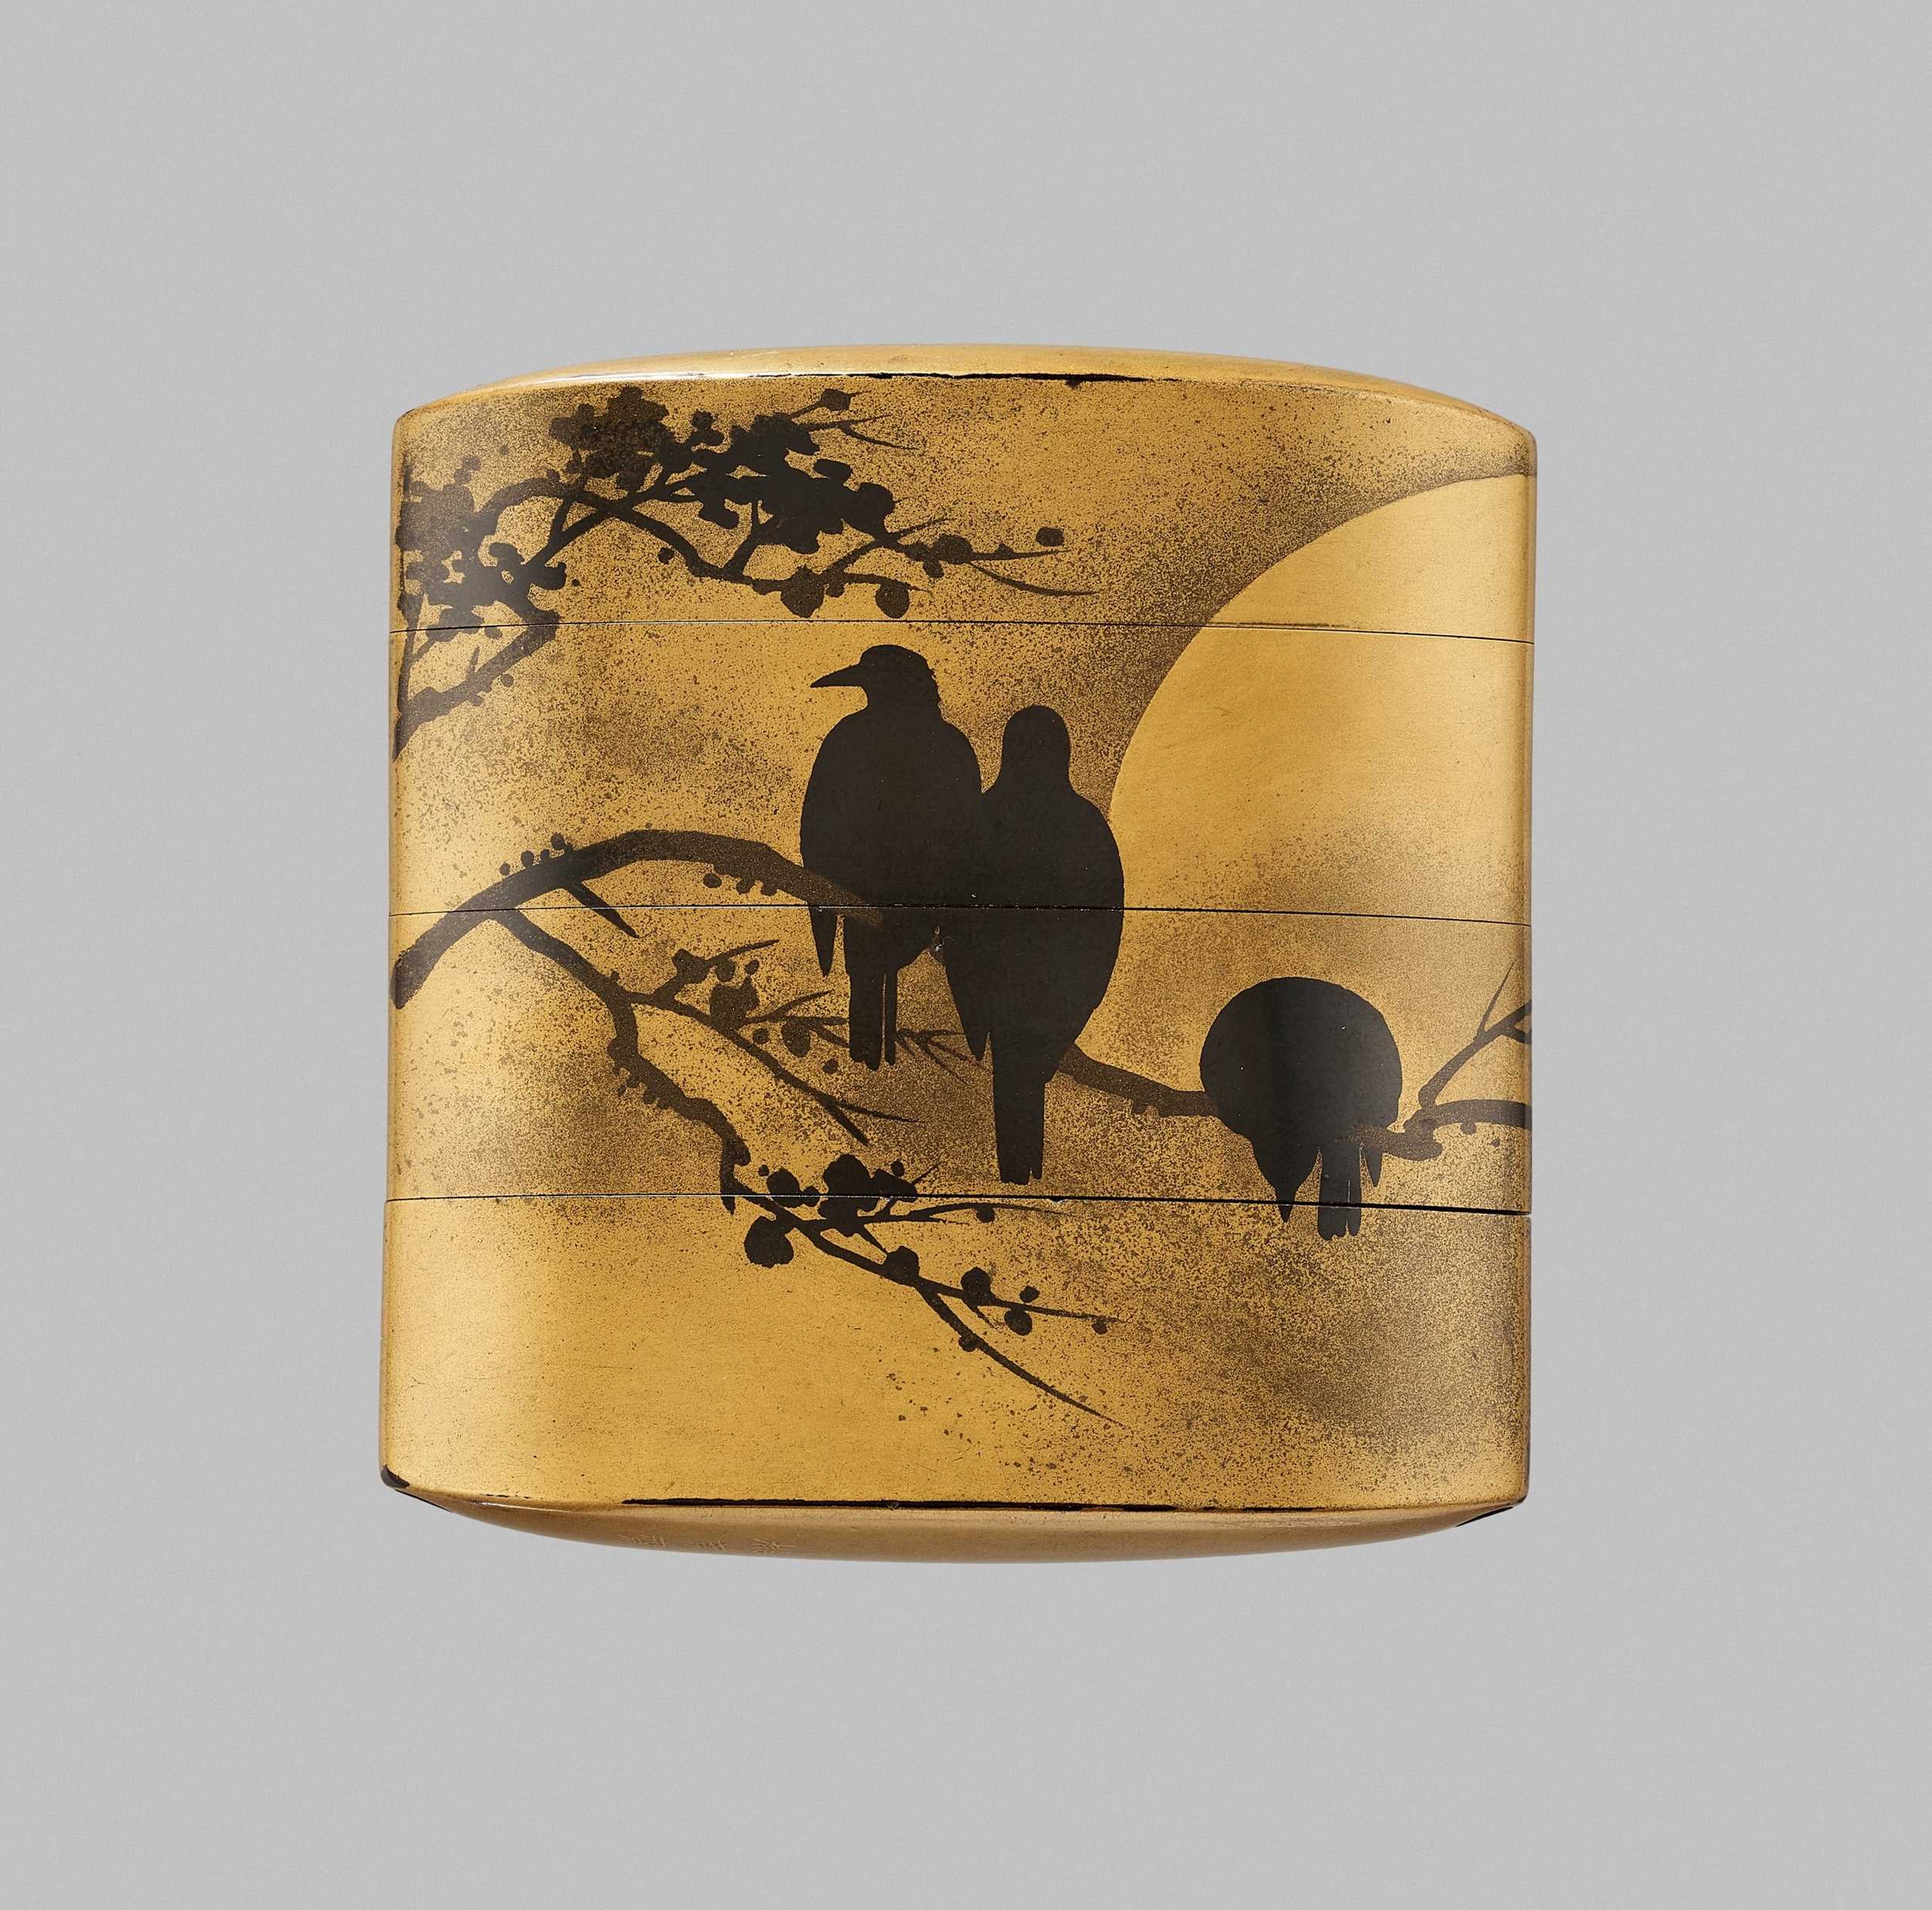 Lot 320 - TOYOSAI: A FINE SUMI TOGIDASHI-E GOLD LACQUER THREE-CASE INRO WITH CROWS AND MOON